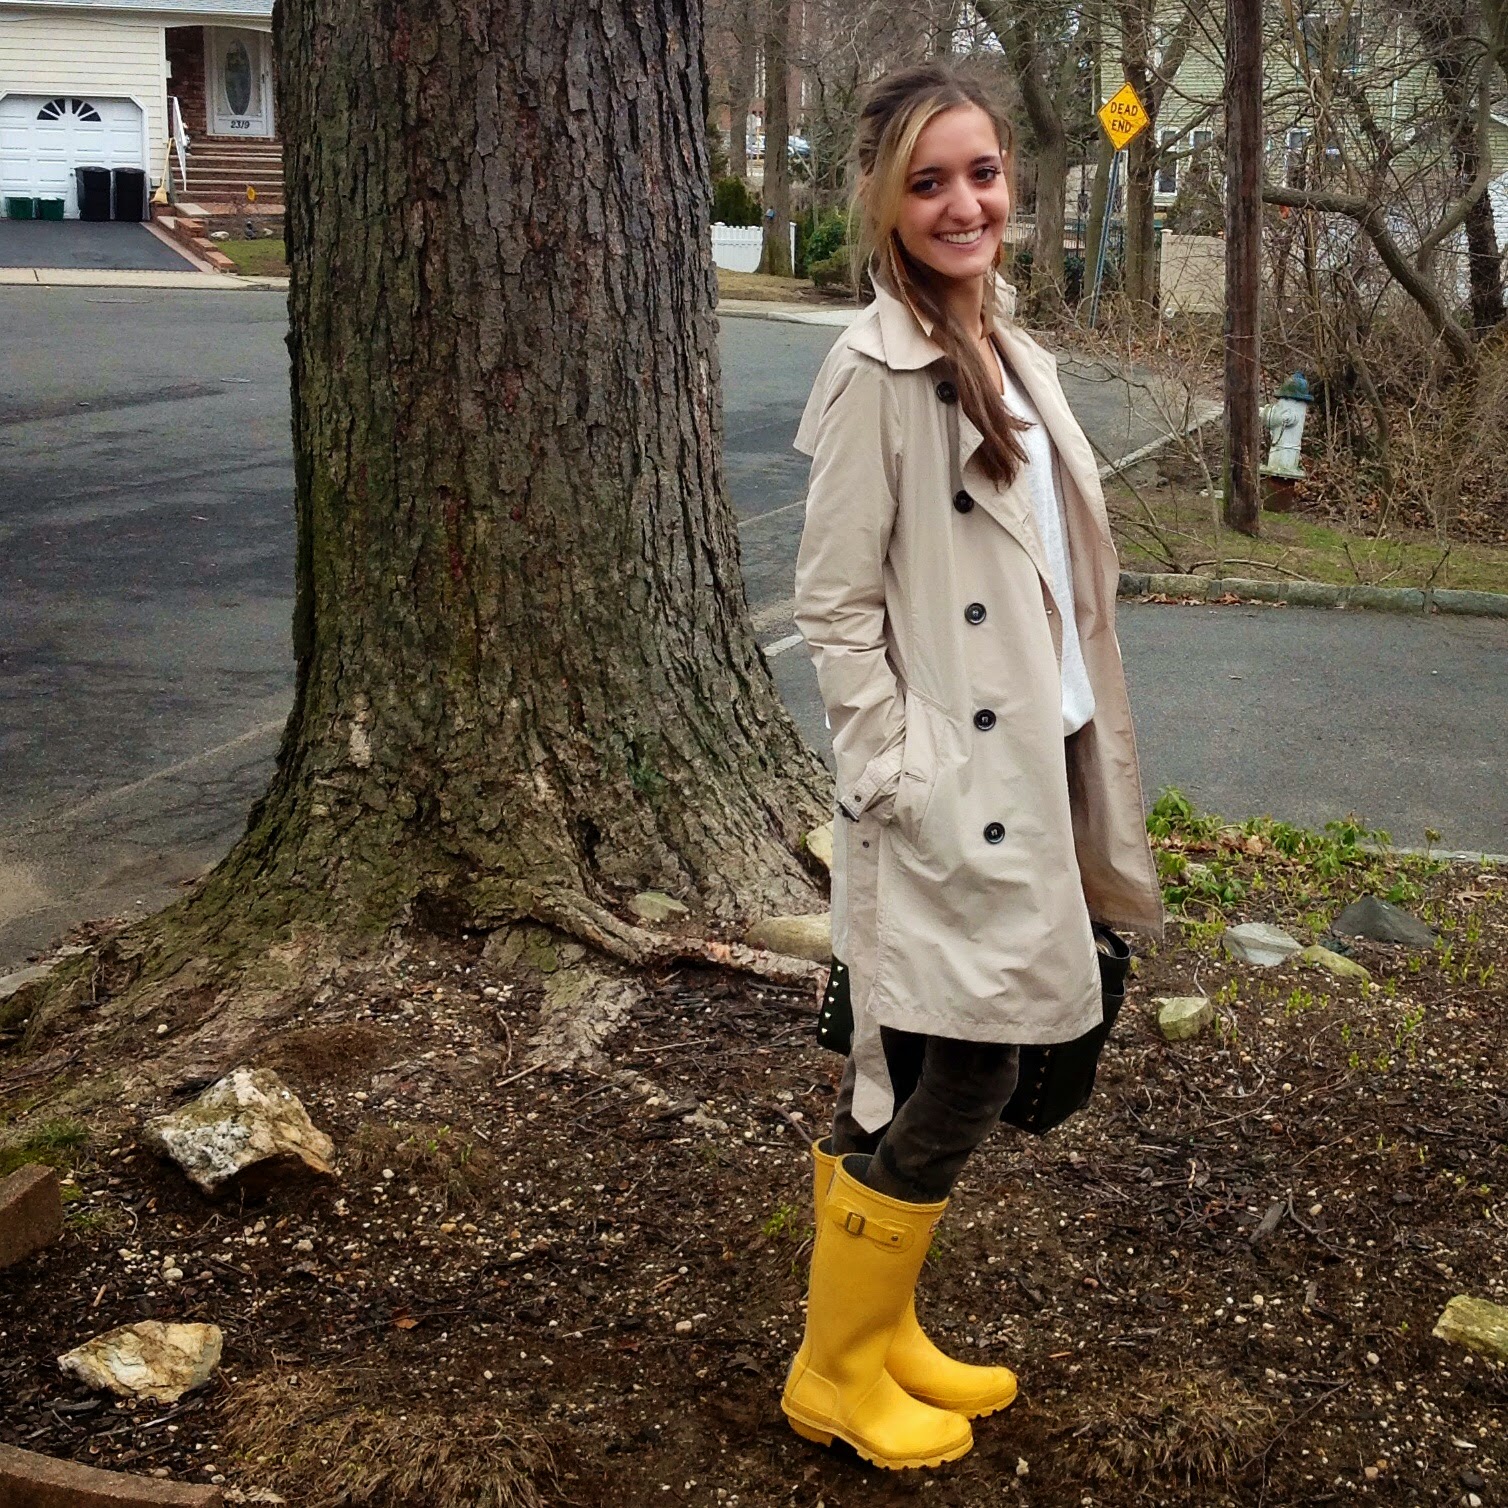 Michelle's Pa(i)ge | Fashion Blogger based in New York: april showers